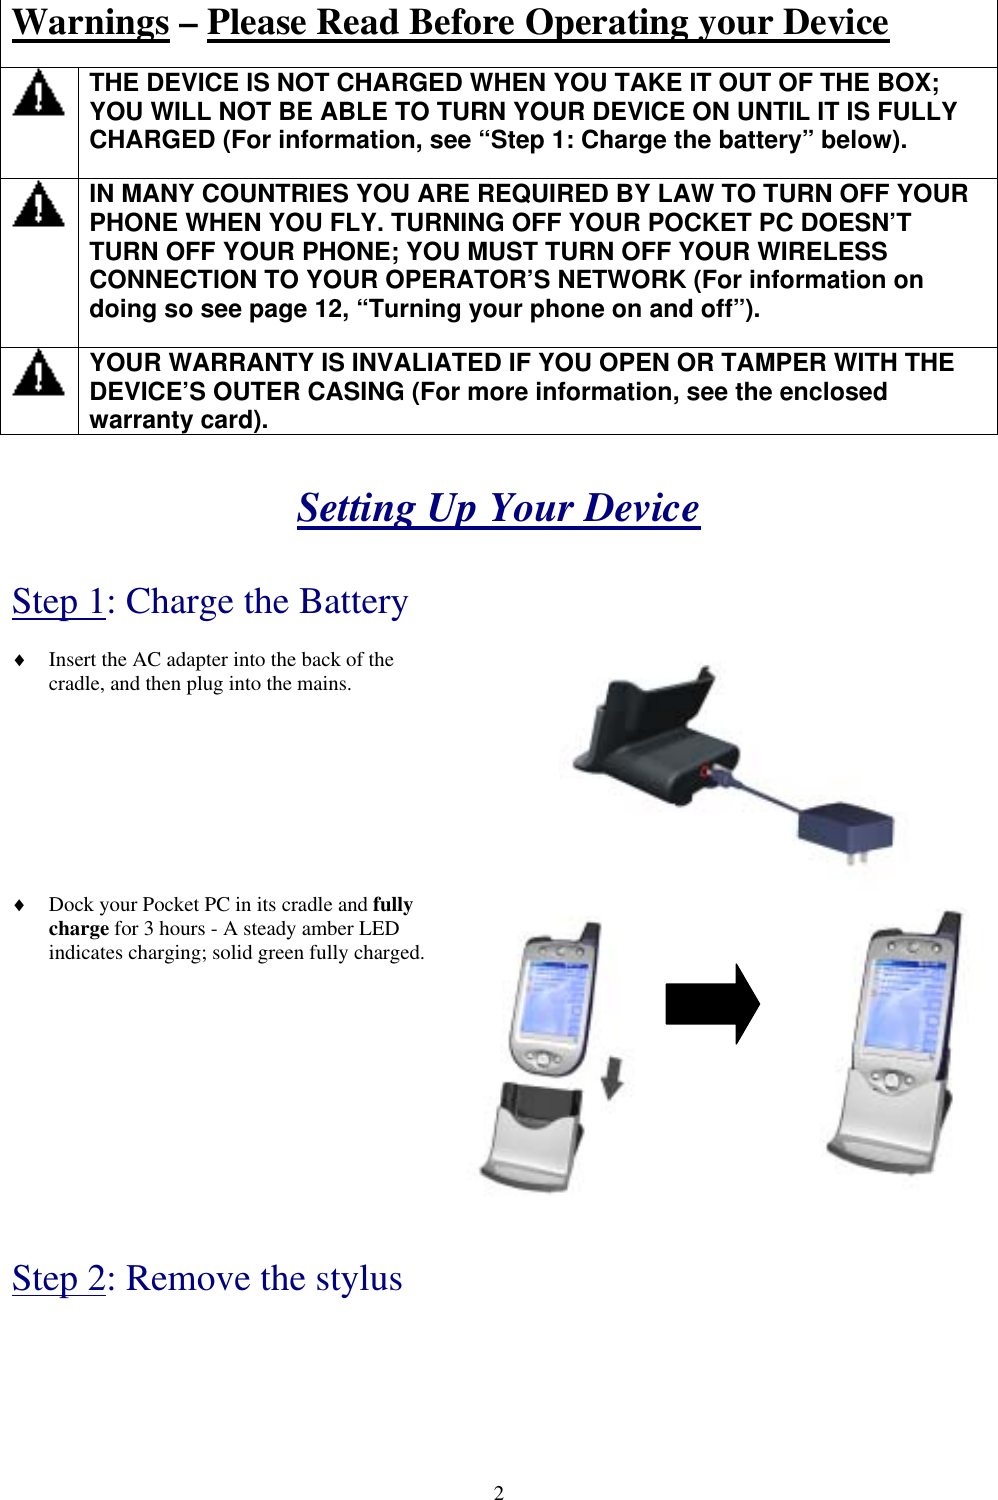  Warnings – Please Read Before Operating your Device   THE DEVICE IS NOT CHARGED WHEN YOU TAKE IT OUT OF THE BOX; YOU WILL NOT BE ABLE TO TURN YOUR DEVICE ON UNTIL IT IS FULLY CHARGED (For information, see “Step 1: Charge the battery” below).   IN MANY COUNTRIES YOU ARE REQUIRED BY LAW TO TURN OFF YOUR PHONE WHEN YOU FLY. TURNING OFF YOUR POCKET PC DOESN’T TURN OFF YOUR PHONE; YOU MUST TURN OFF YOUR WIRELESS CONNECTION TO YOUR OPERATOR’S NETWORK (For information on doing so see page 12, “Turning your phone on and off”).   YOUR WARRANTY IS INVALIATED IF YOU OPEN OR TAMPER WITH THE DEVICE’S OUTER CASING (For more information, see the enclosed warranty card).   Setting Up Your Device   Step 1: Charge the Battery  ♦  Insert the AC adapter into the back of the cradle, and then plug into the mains.   ♦  Dock your Pocket PC in its cradle and fully charge for 3 hours - A steady amber LED indicates charging; solid green fully charged.            Step 2: Remove the stylus   2